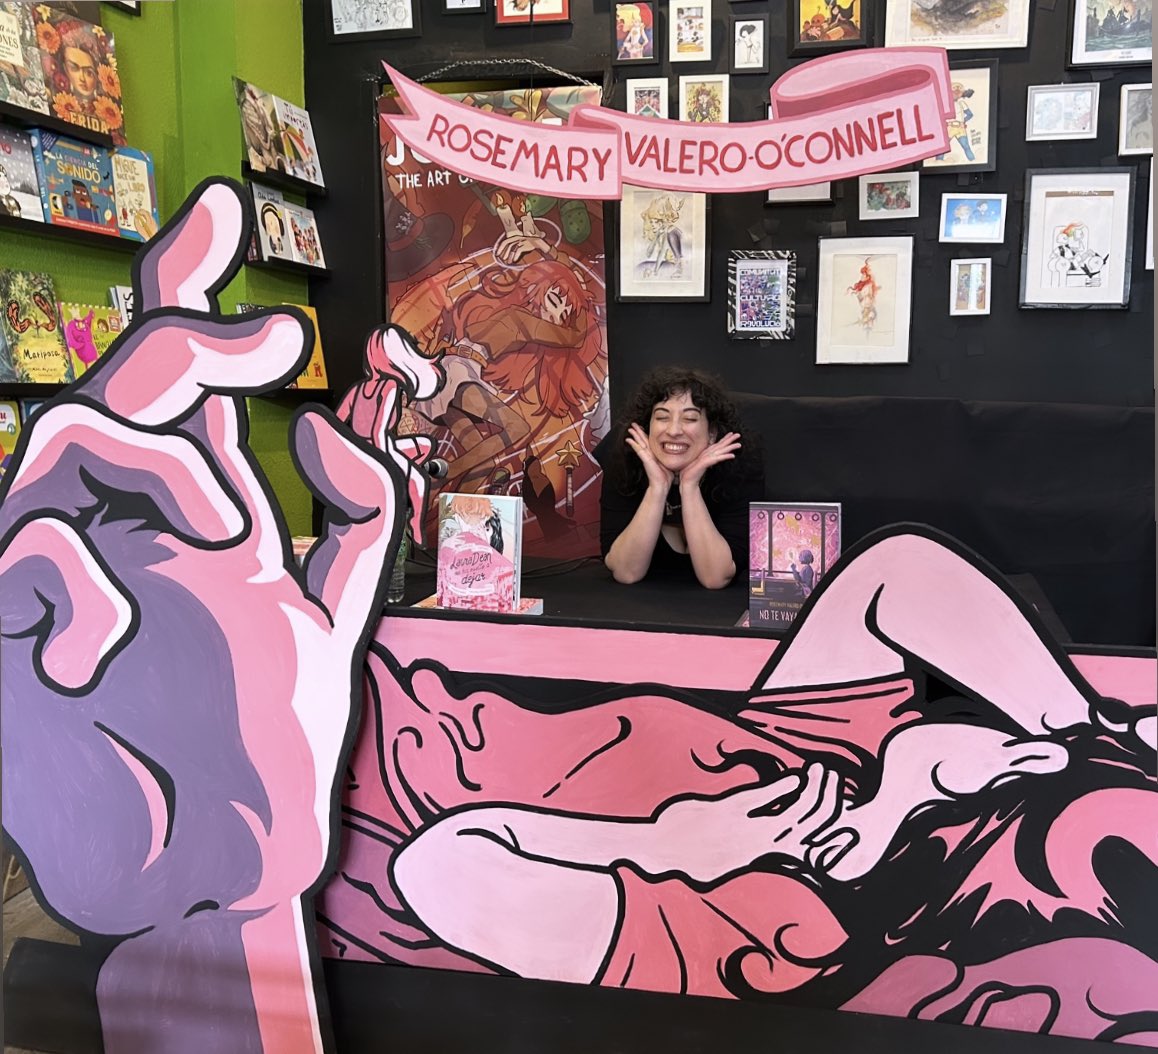 Completely and utterly blown away by the incredible hand painted display and wonderfully warm welcome that @delirioenlaweb gave me yesterday! If you’re ever near Madrid go straight to their shop, I’ve never met anyone so devoted to comics and the community they can foster 🥹💓